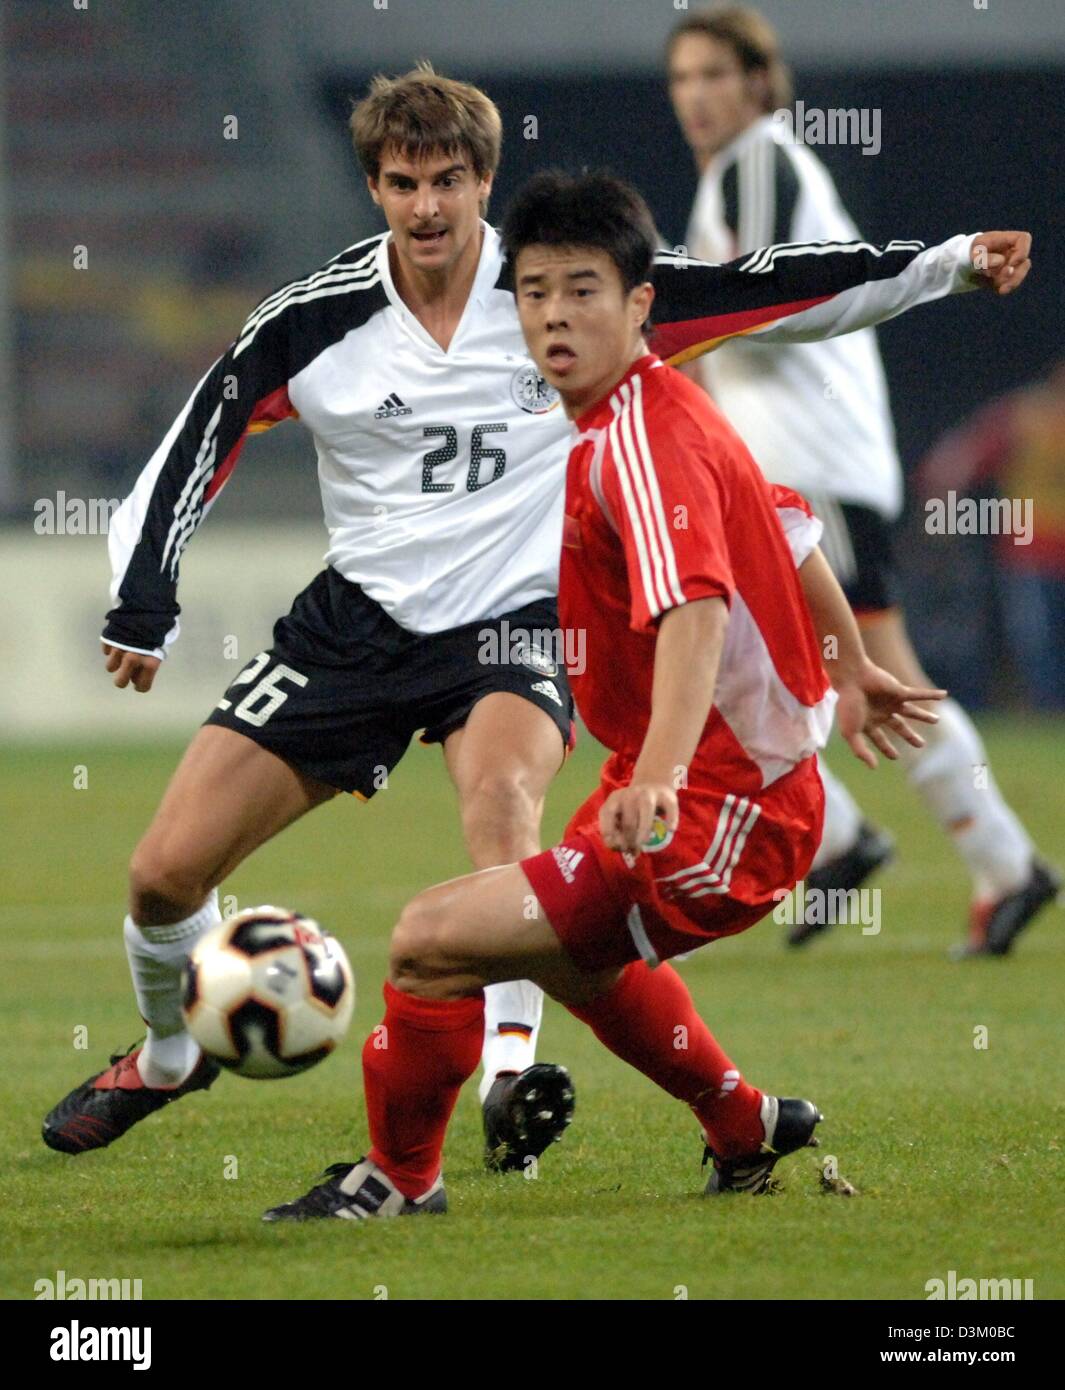 (dpa) - German national soccer player Sebastian Deisler (L) and Chinese player Xiang Sun vie for the ball in the friendly match Germany vs China in the AOL arena in Hamburg, Germany, 12 October 2005. Germany won the match 1-0. Photo: Kay Nietfeld Stock Photo